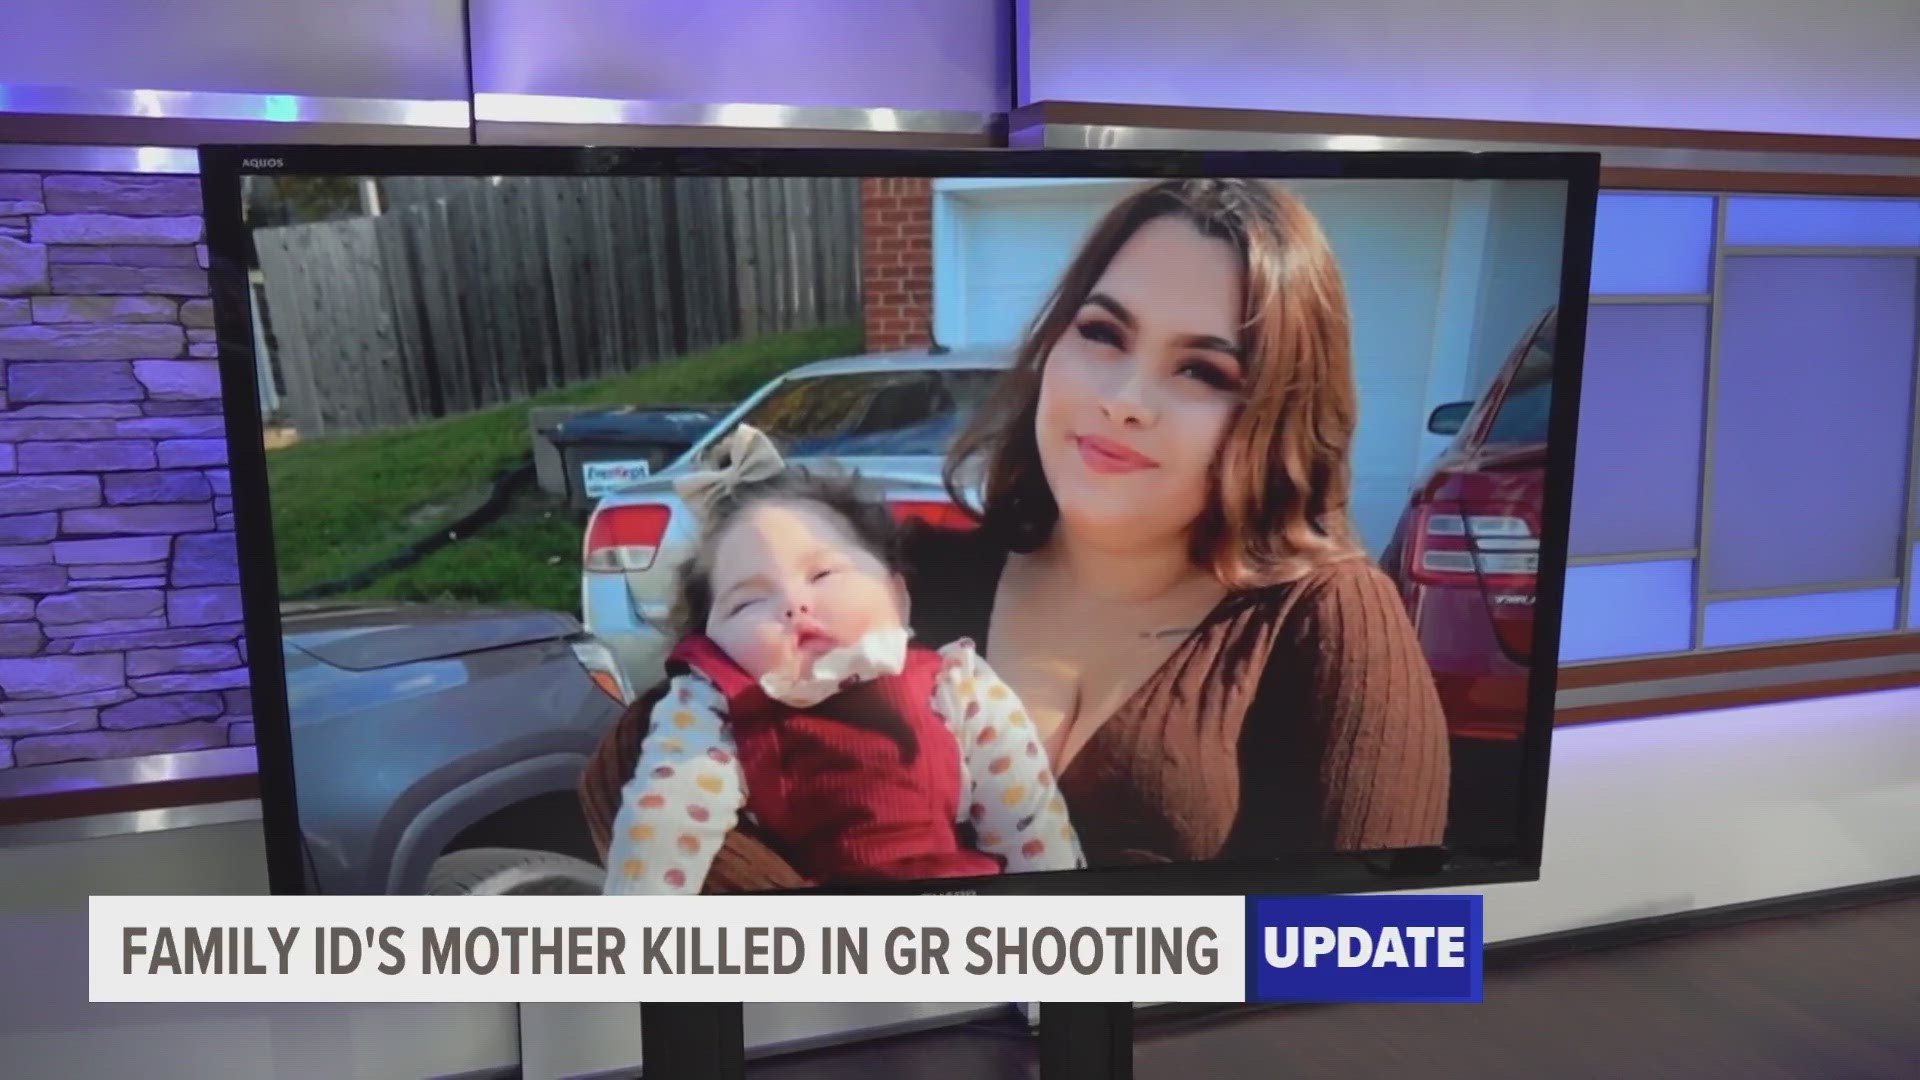 Grand Rapids Police said the fatal shooting happened downtown and her baby wasn't hurt. The woman's father identified her as Leah Marie Gomez.